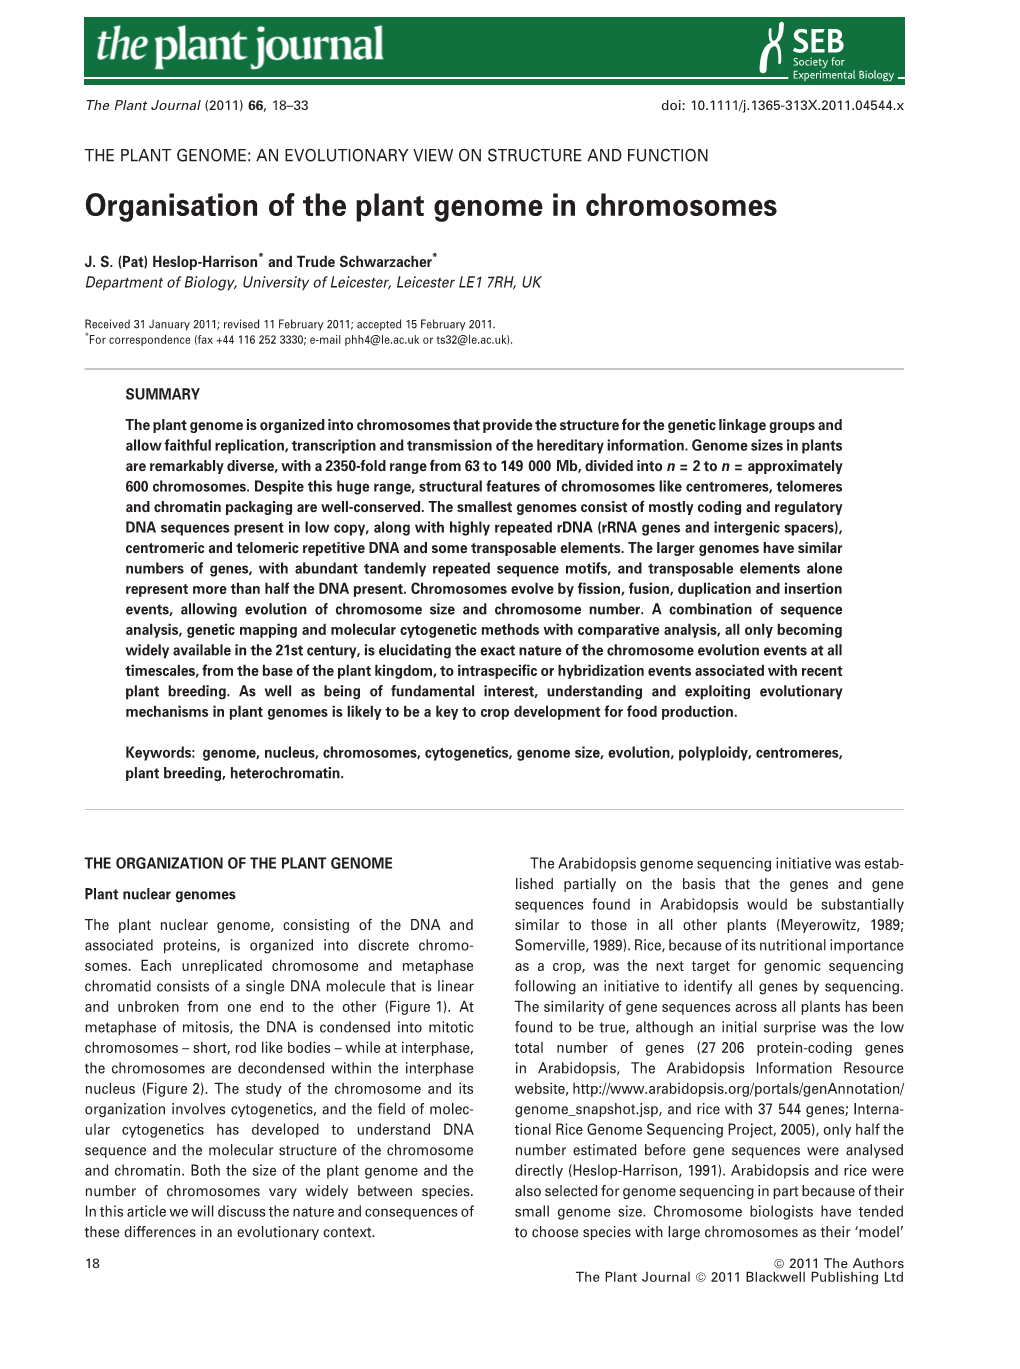 Organisation of the Plant Genome in Chromosomes